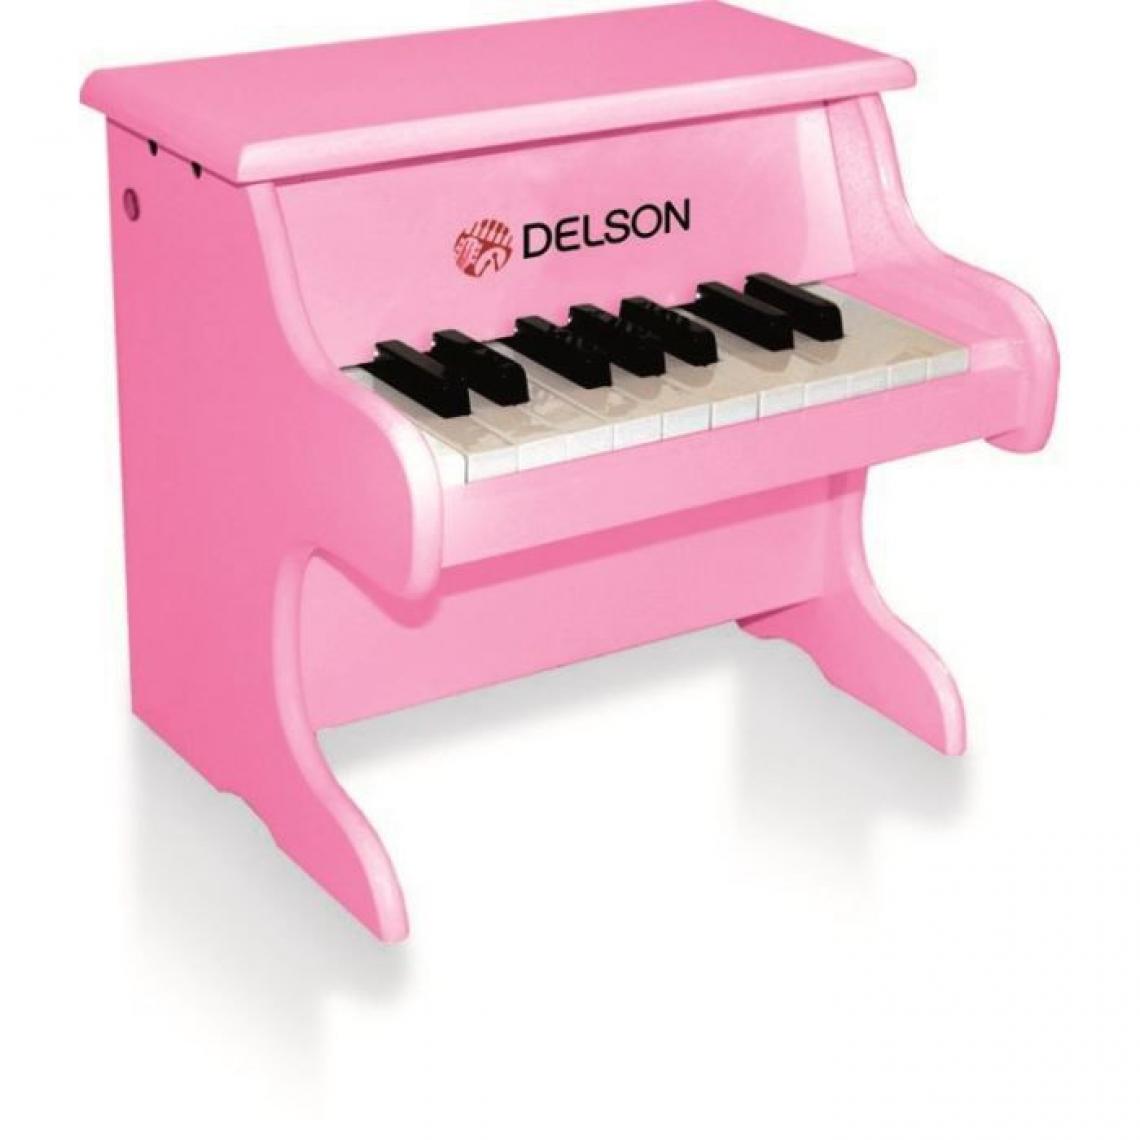 Shot - DELSON Piano bebe rose 18 touches - Accessoires claviers